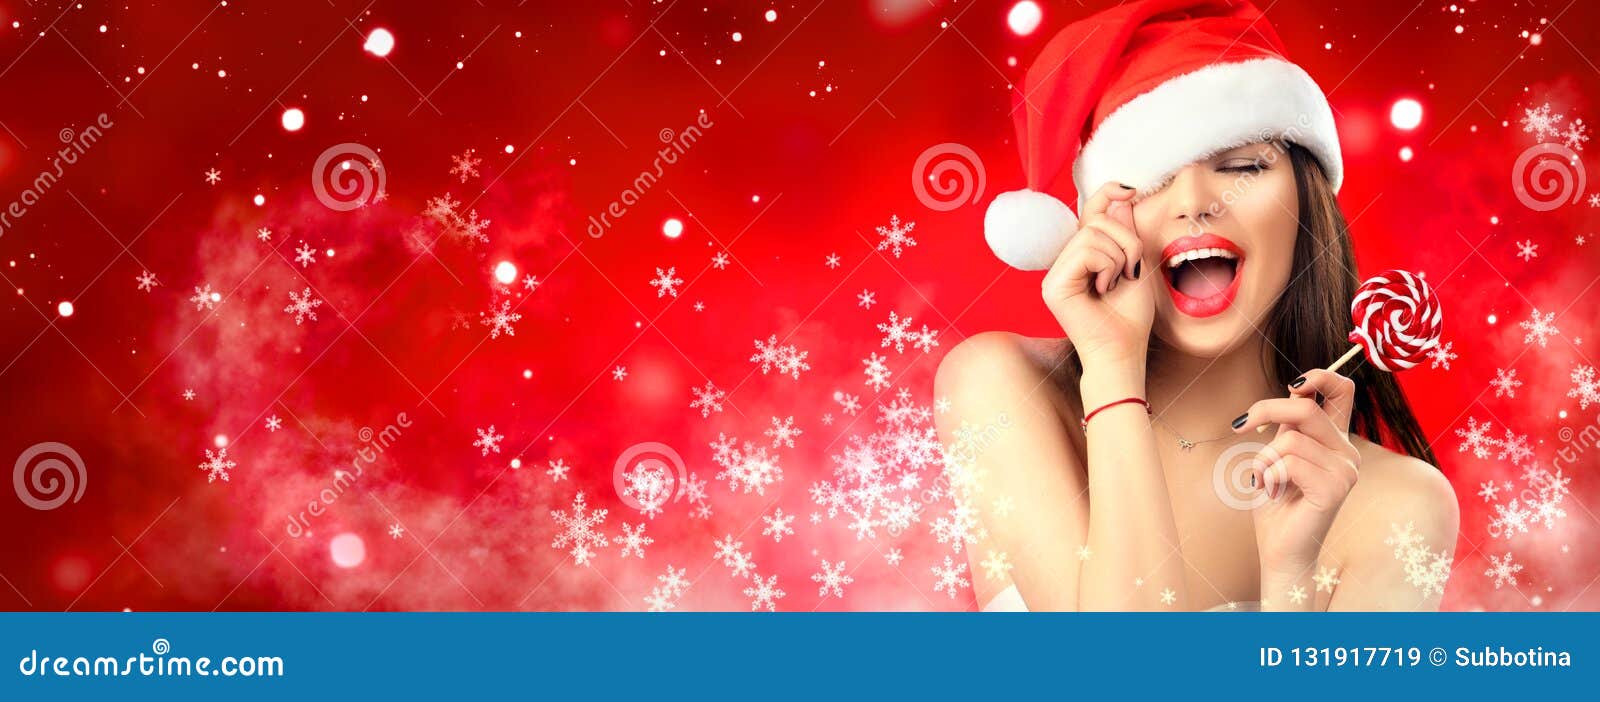 christmas woman. joyful model girl in santa`s hat with red lips and lollipop candy in her hand